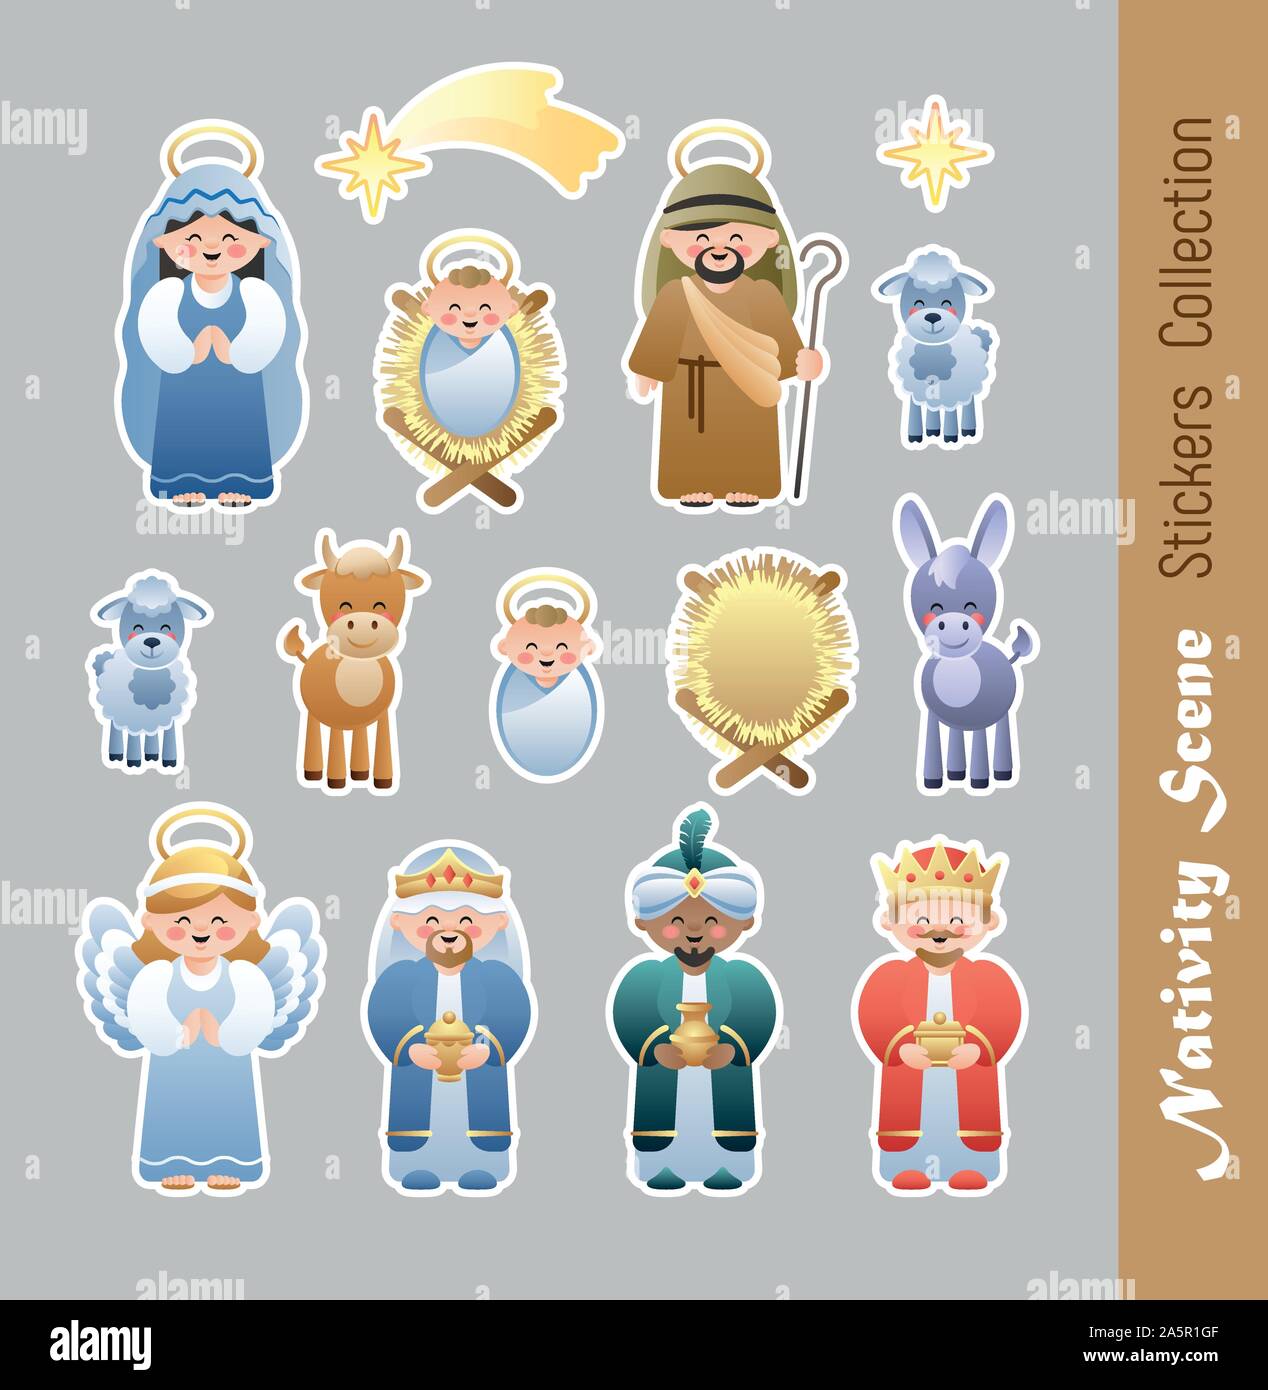 Nativity Scene Stickers Collection. Cute cartoon characters. Vector illustration without transparency. Stock Vector